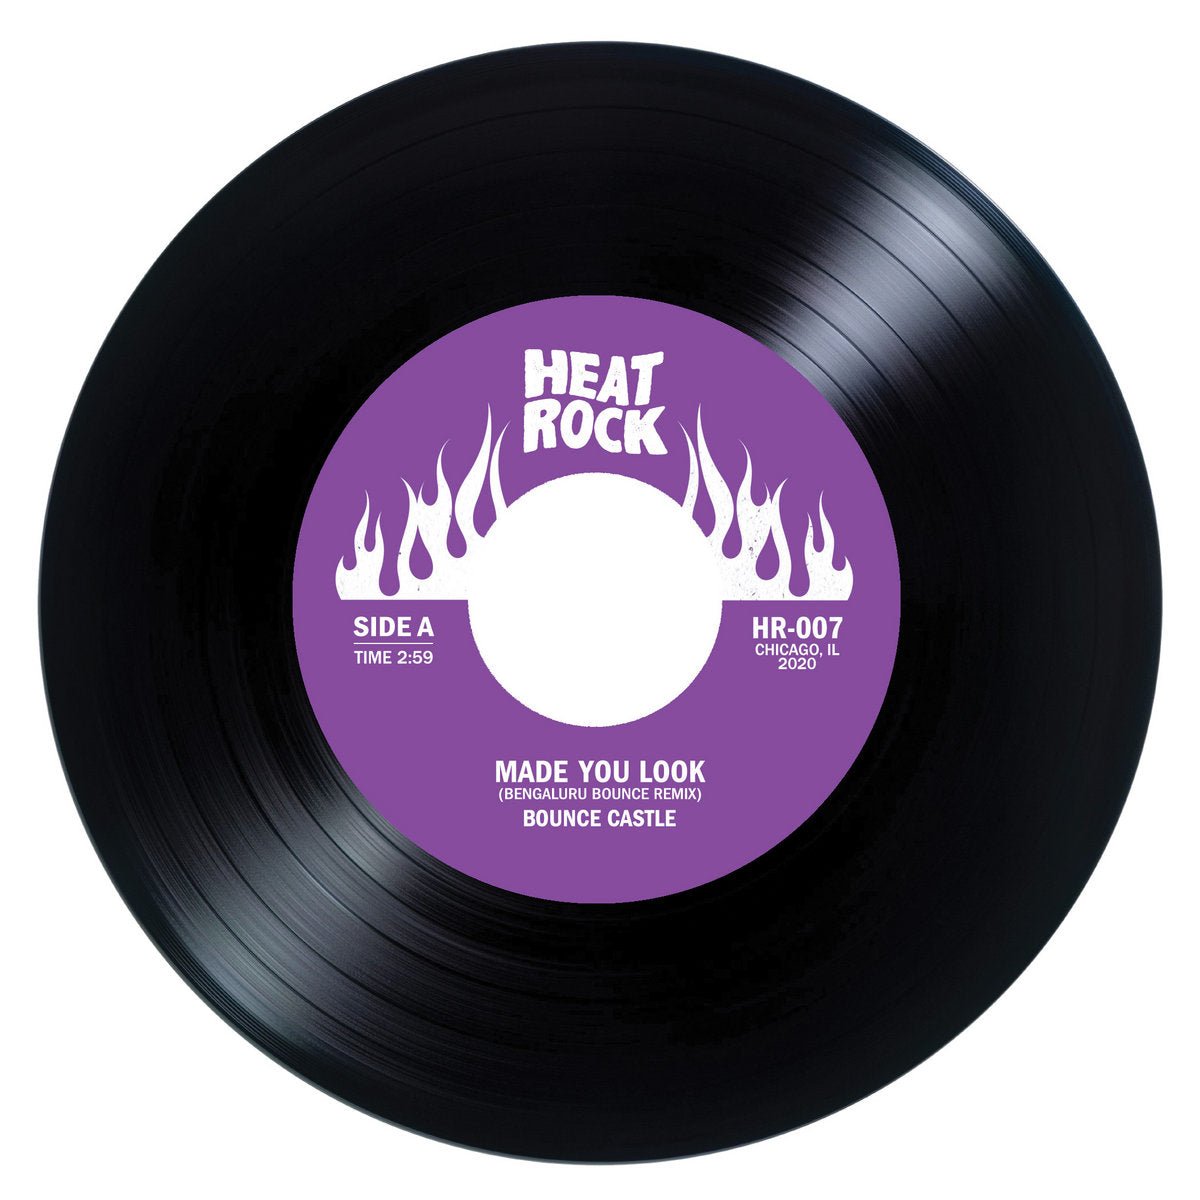 Made You Look (New 7")